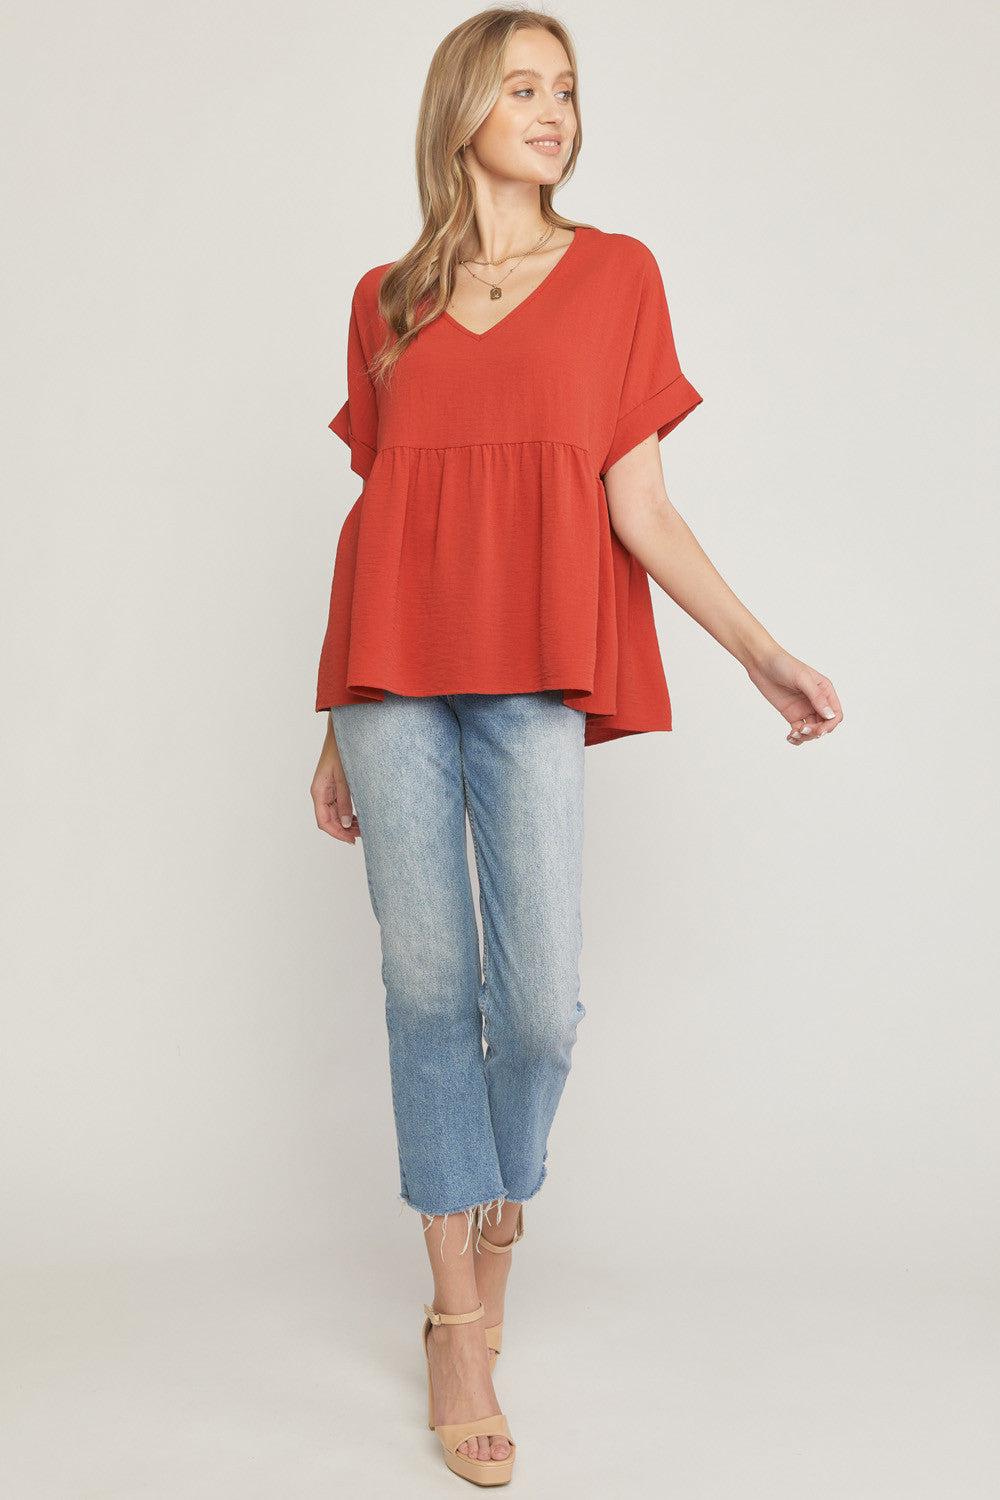 Rolled Sleeve V-Neck Babydoll Top by Entro Clothing